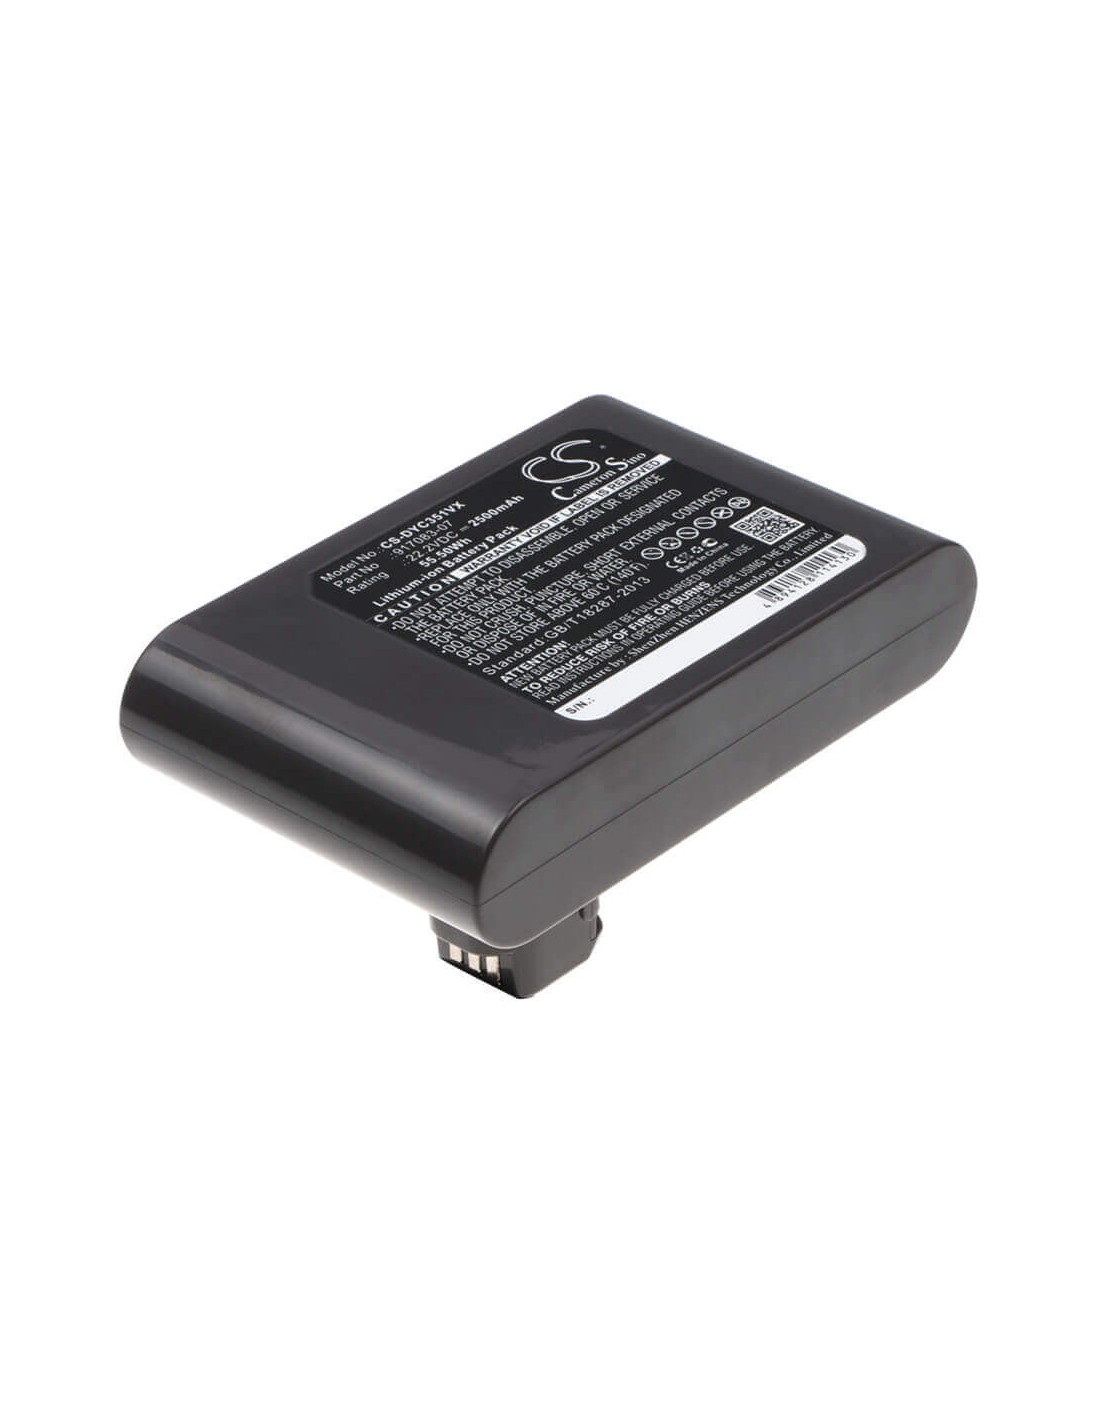 Super High Capacity 2500Mah Battery for Dyson Dc30, Dc31, Dc35, 22.2V, 55.50Wh